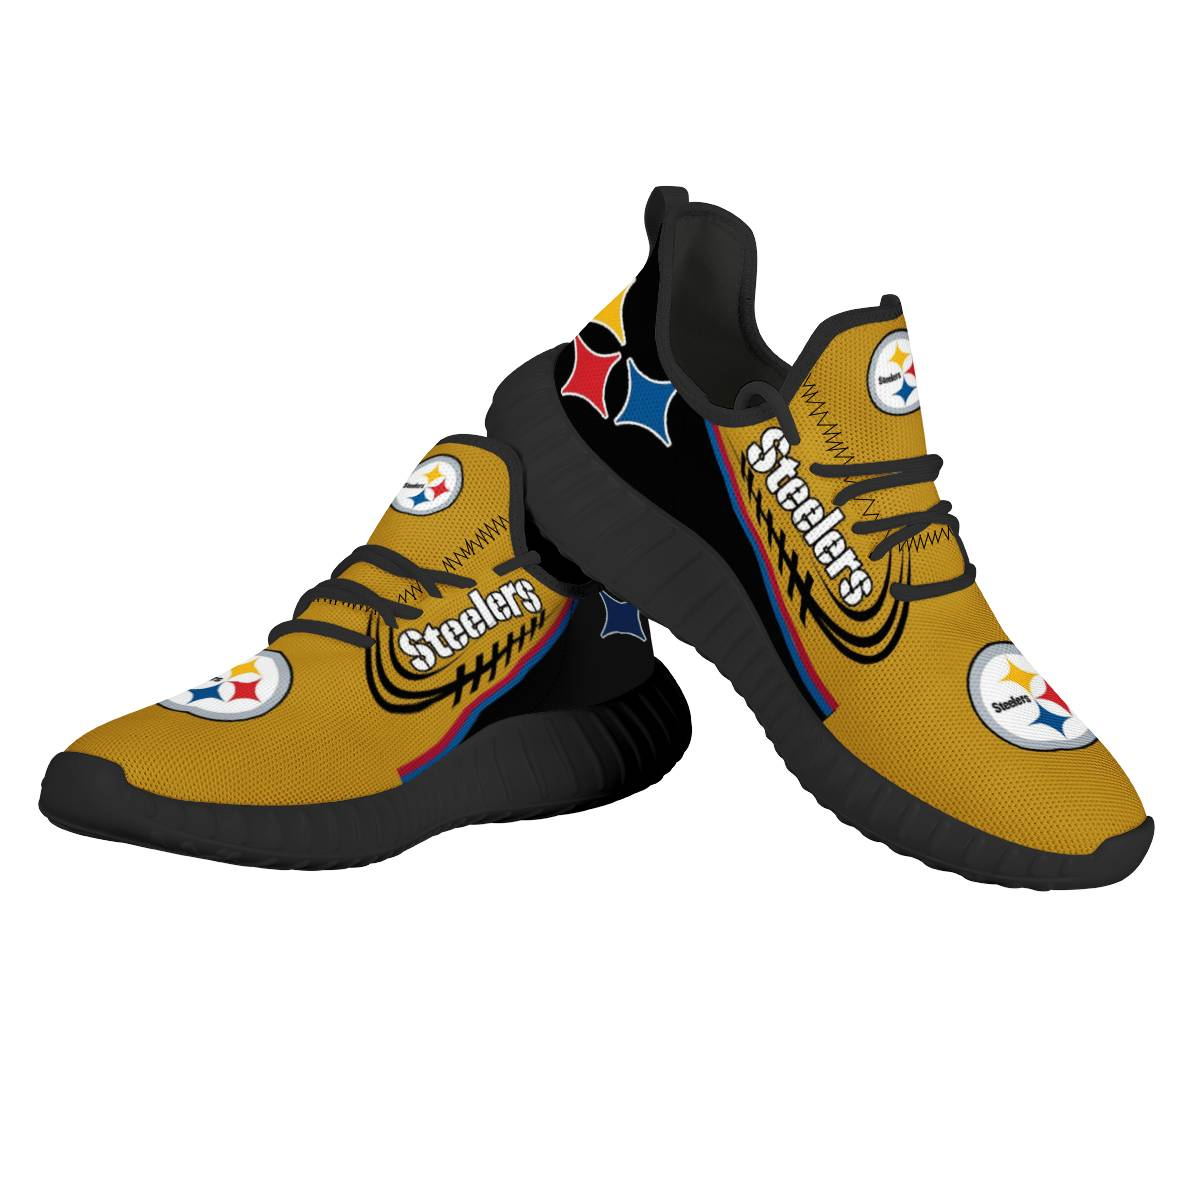 Men's Pittsburgh Steelers Mesh Knit Sneakers/Shoes 013